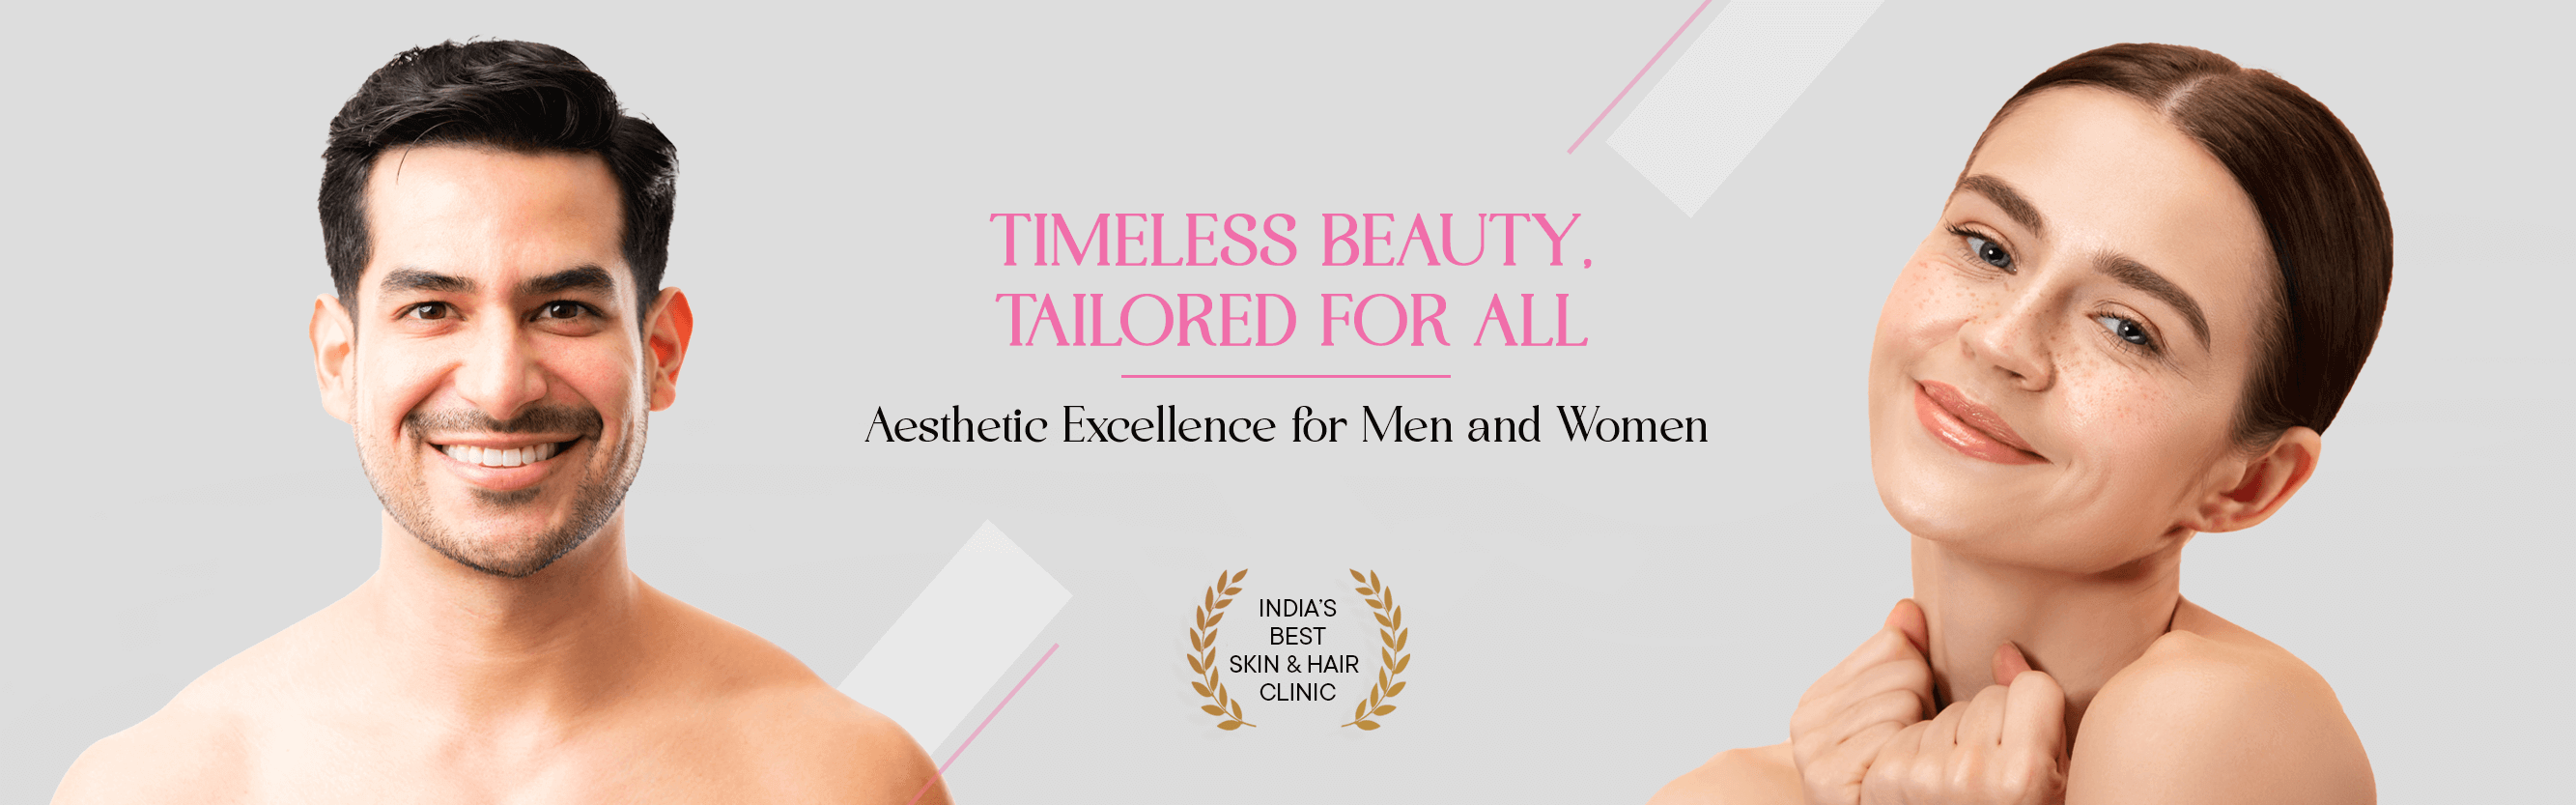 Aesthetic Excellence for Men and Women